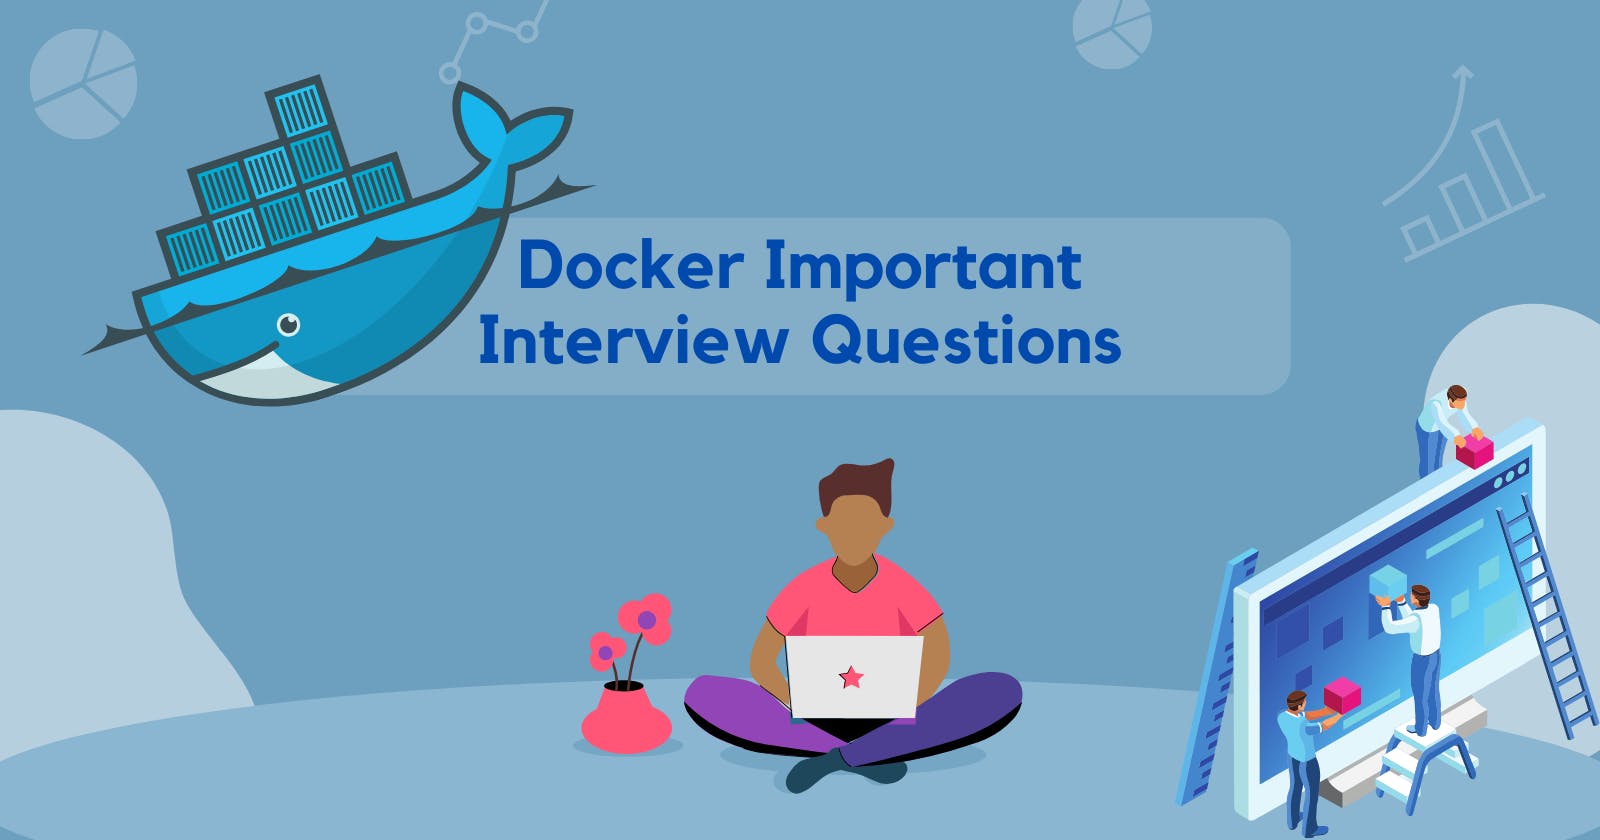 🐳Day 21 - Docker Important Interview Questions